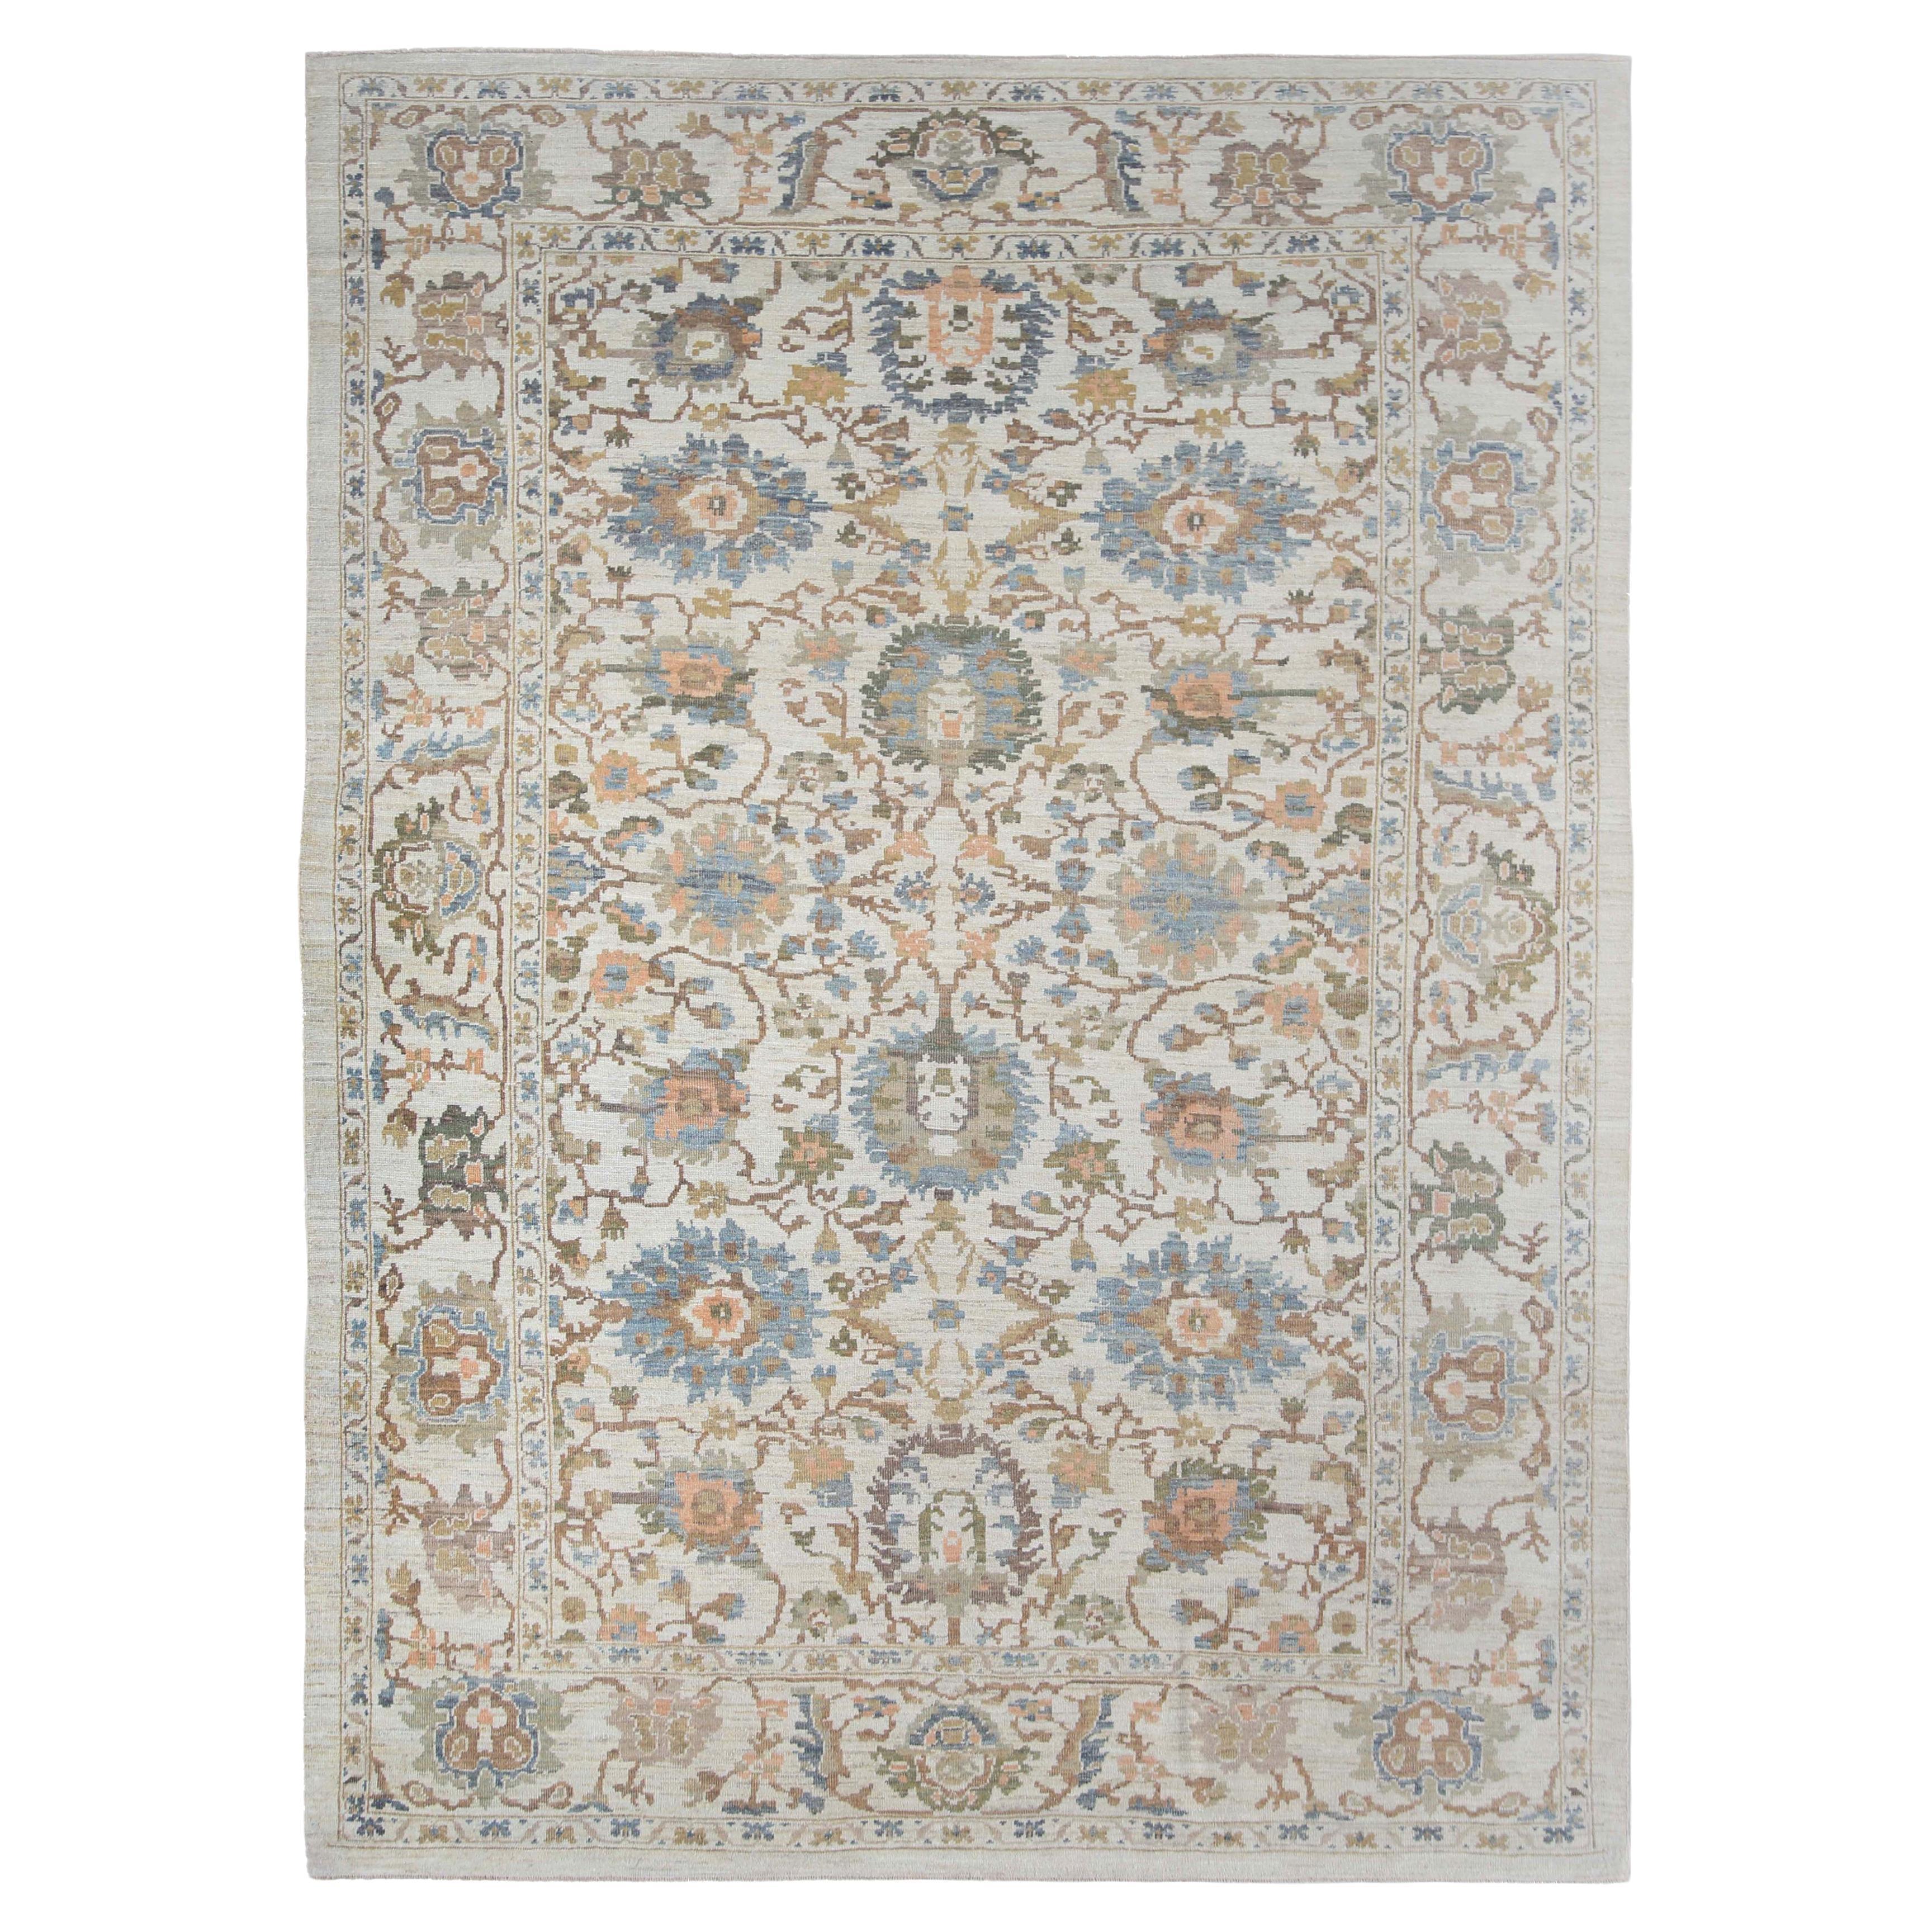 Classic Sultanabad Design Handmade Rug with Cool Tones